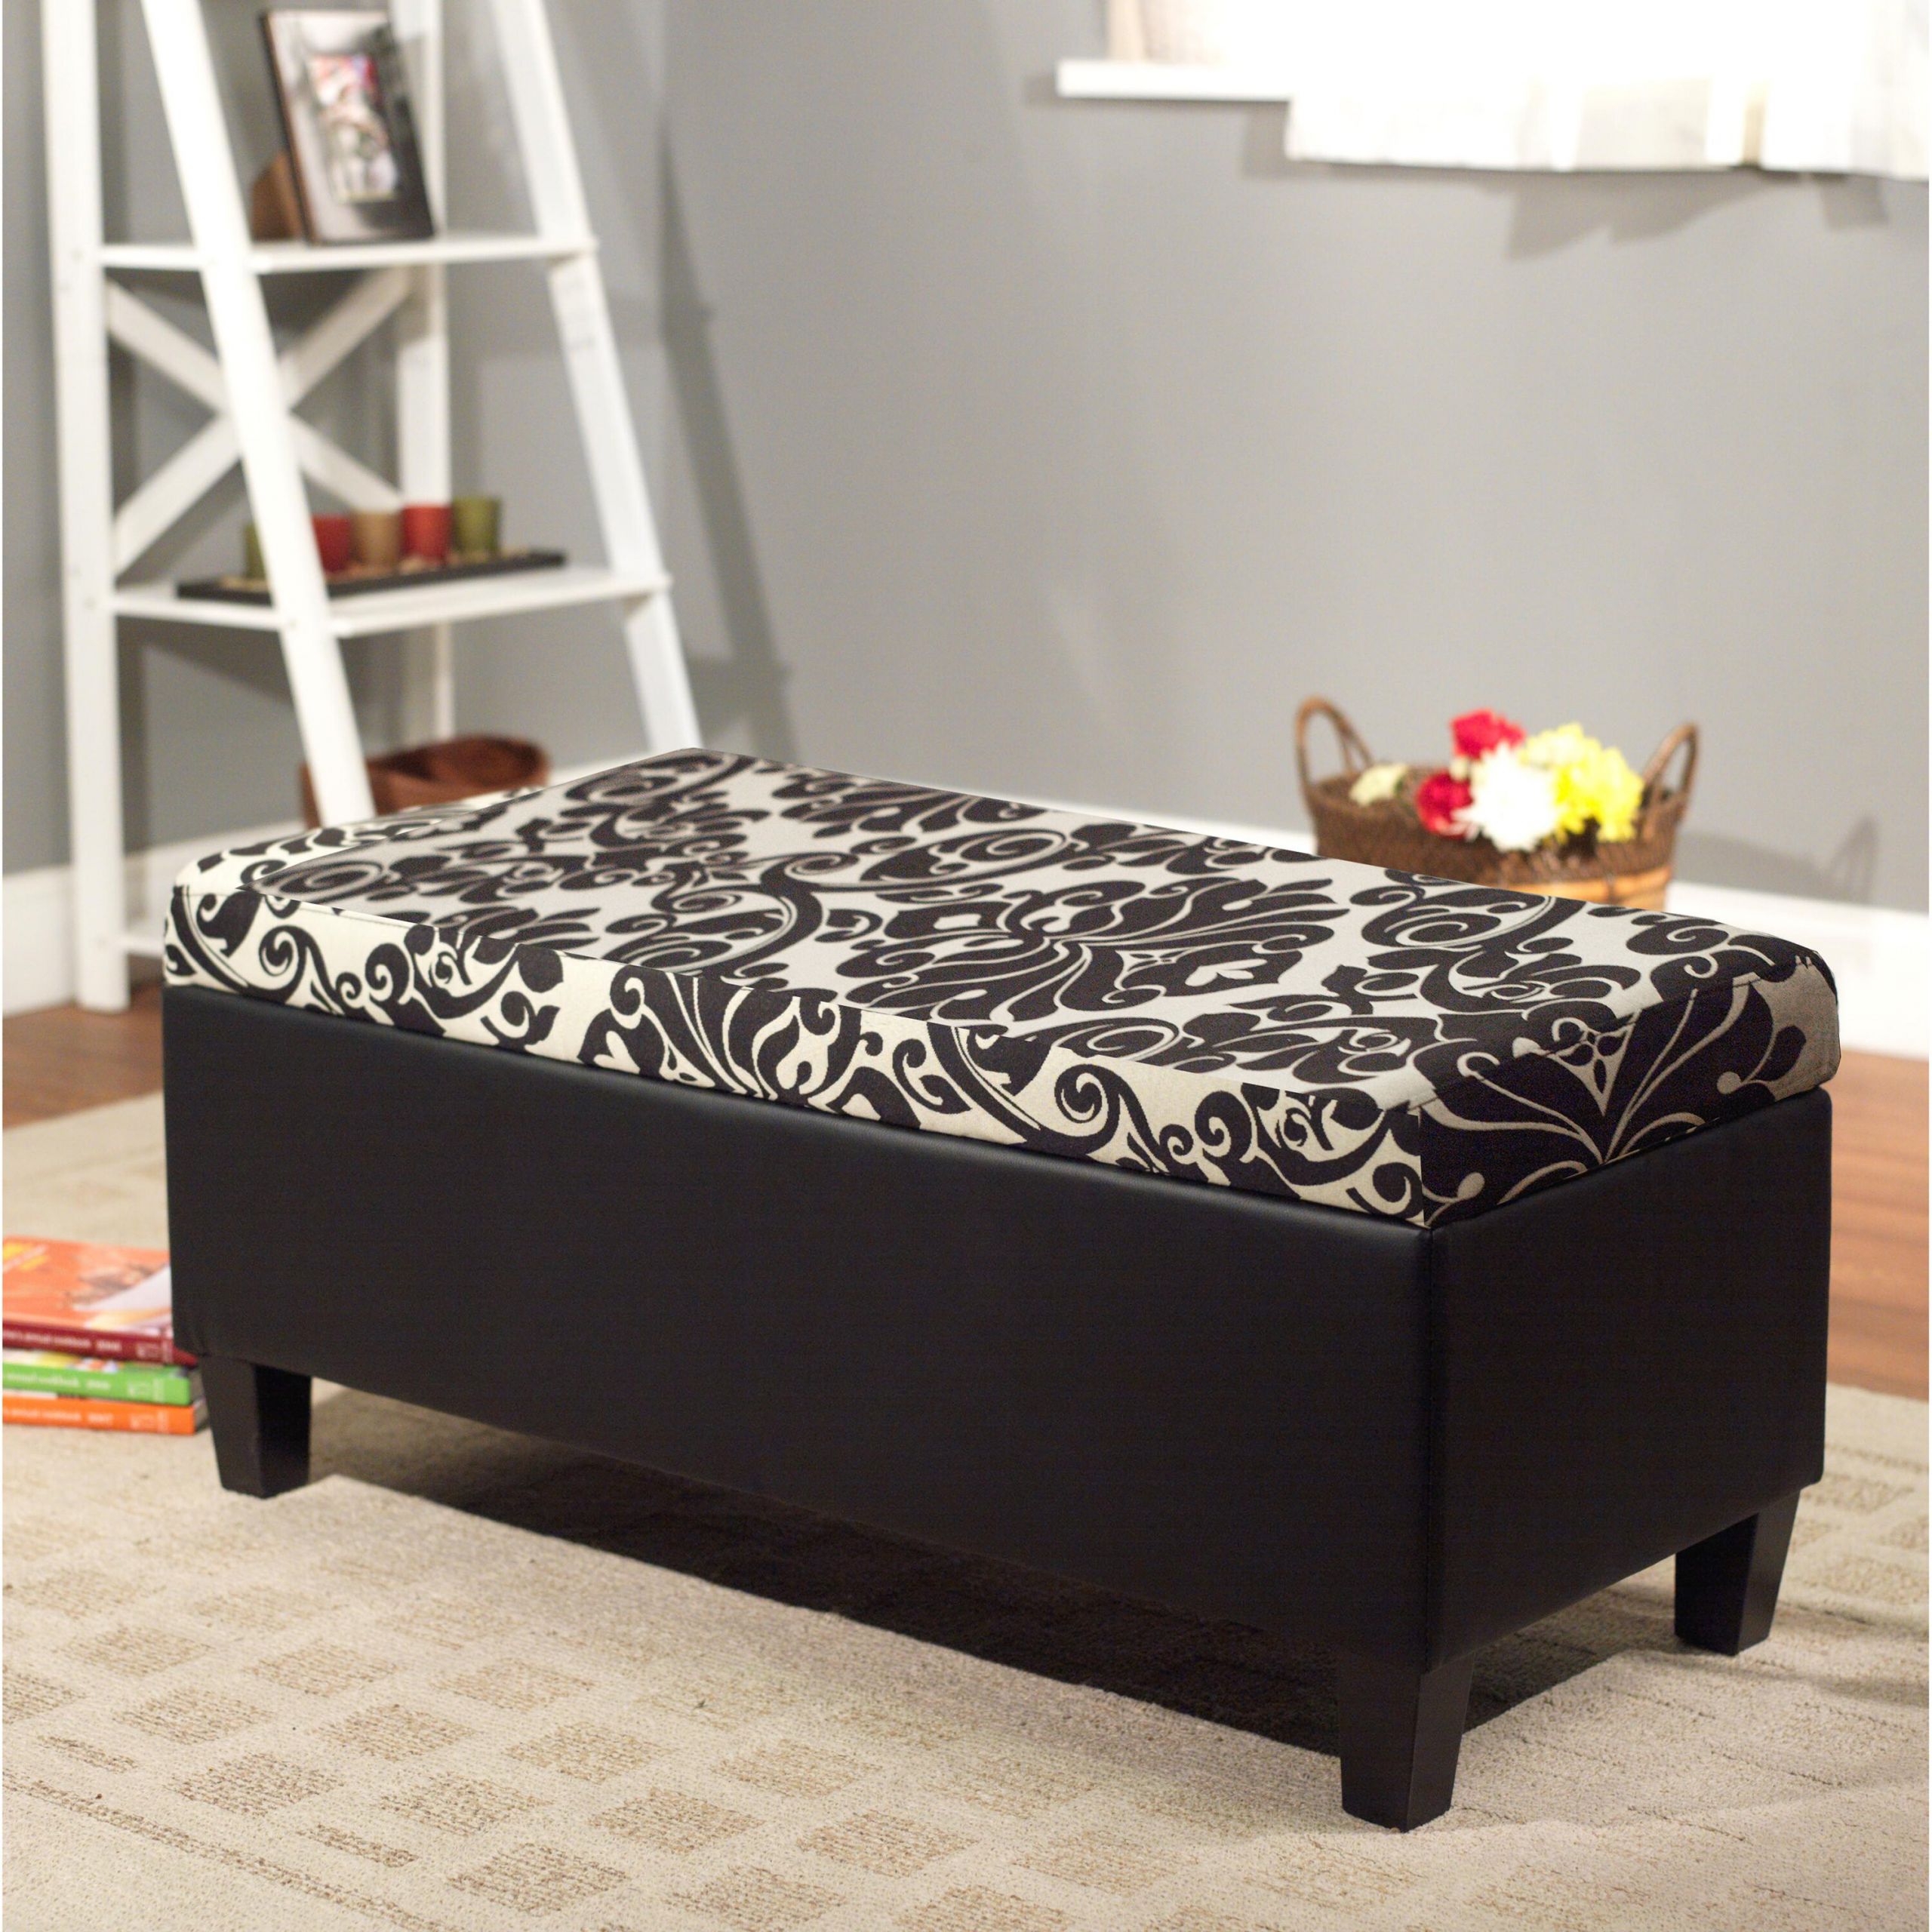 Bed Bench Storage
 TMS Zoe Storage Bedroom Bench & Reviews